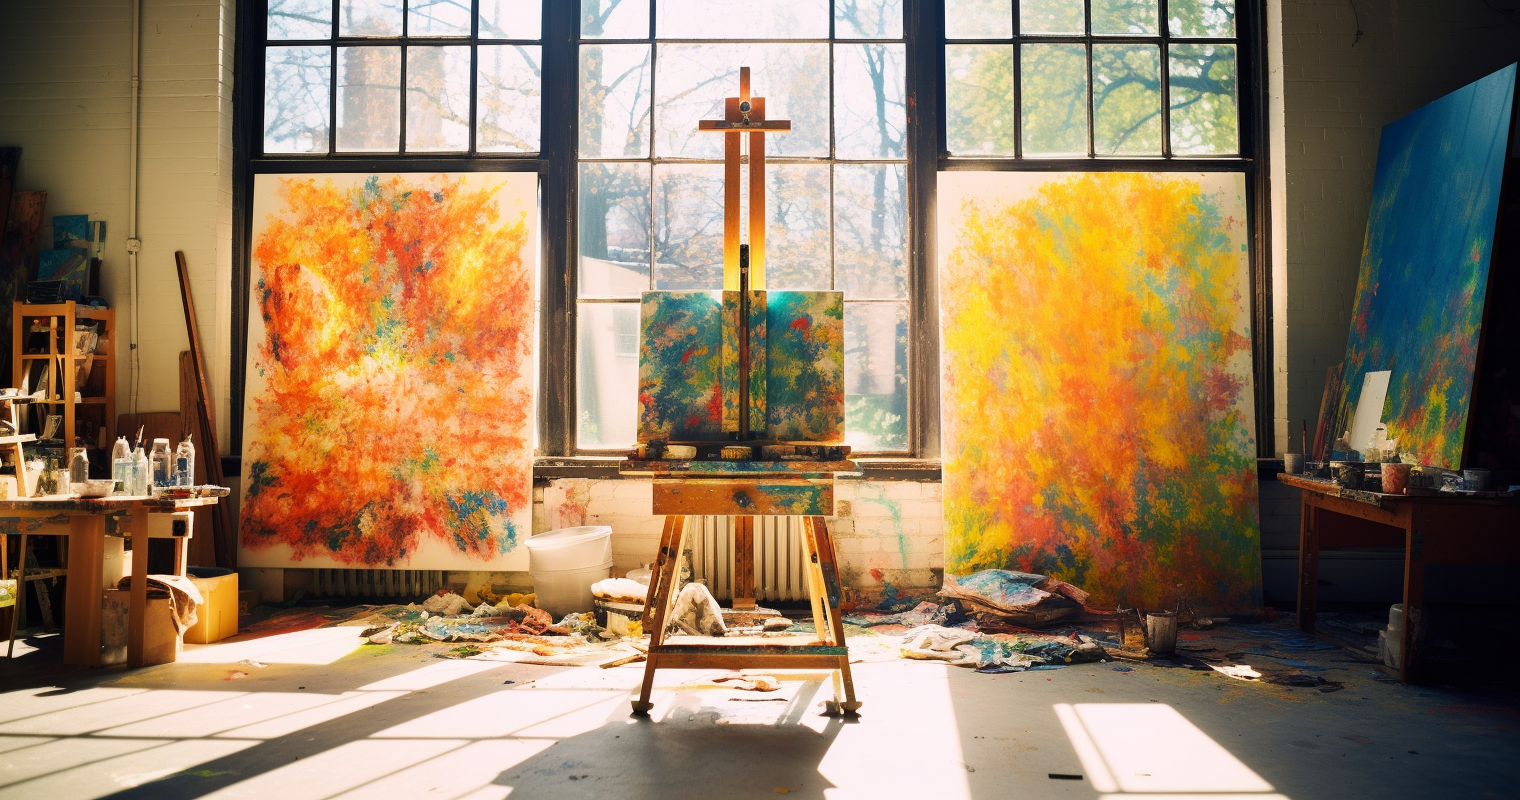 An artist's studio bathed in natural sunlight